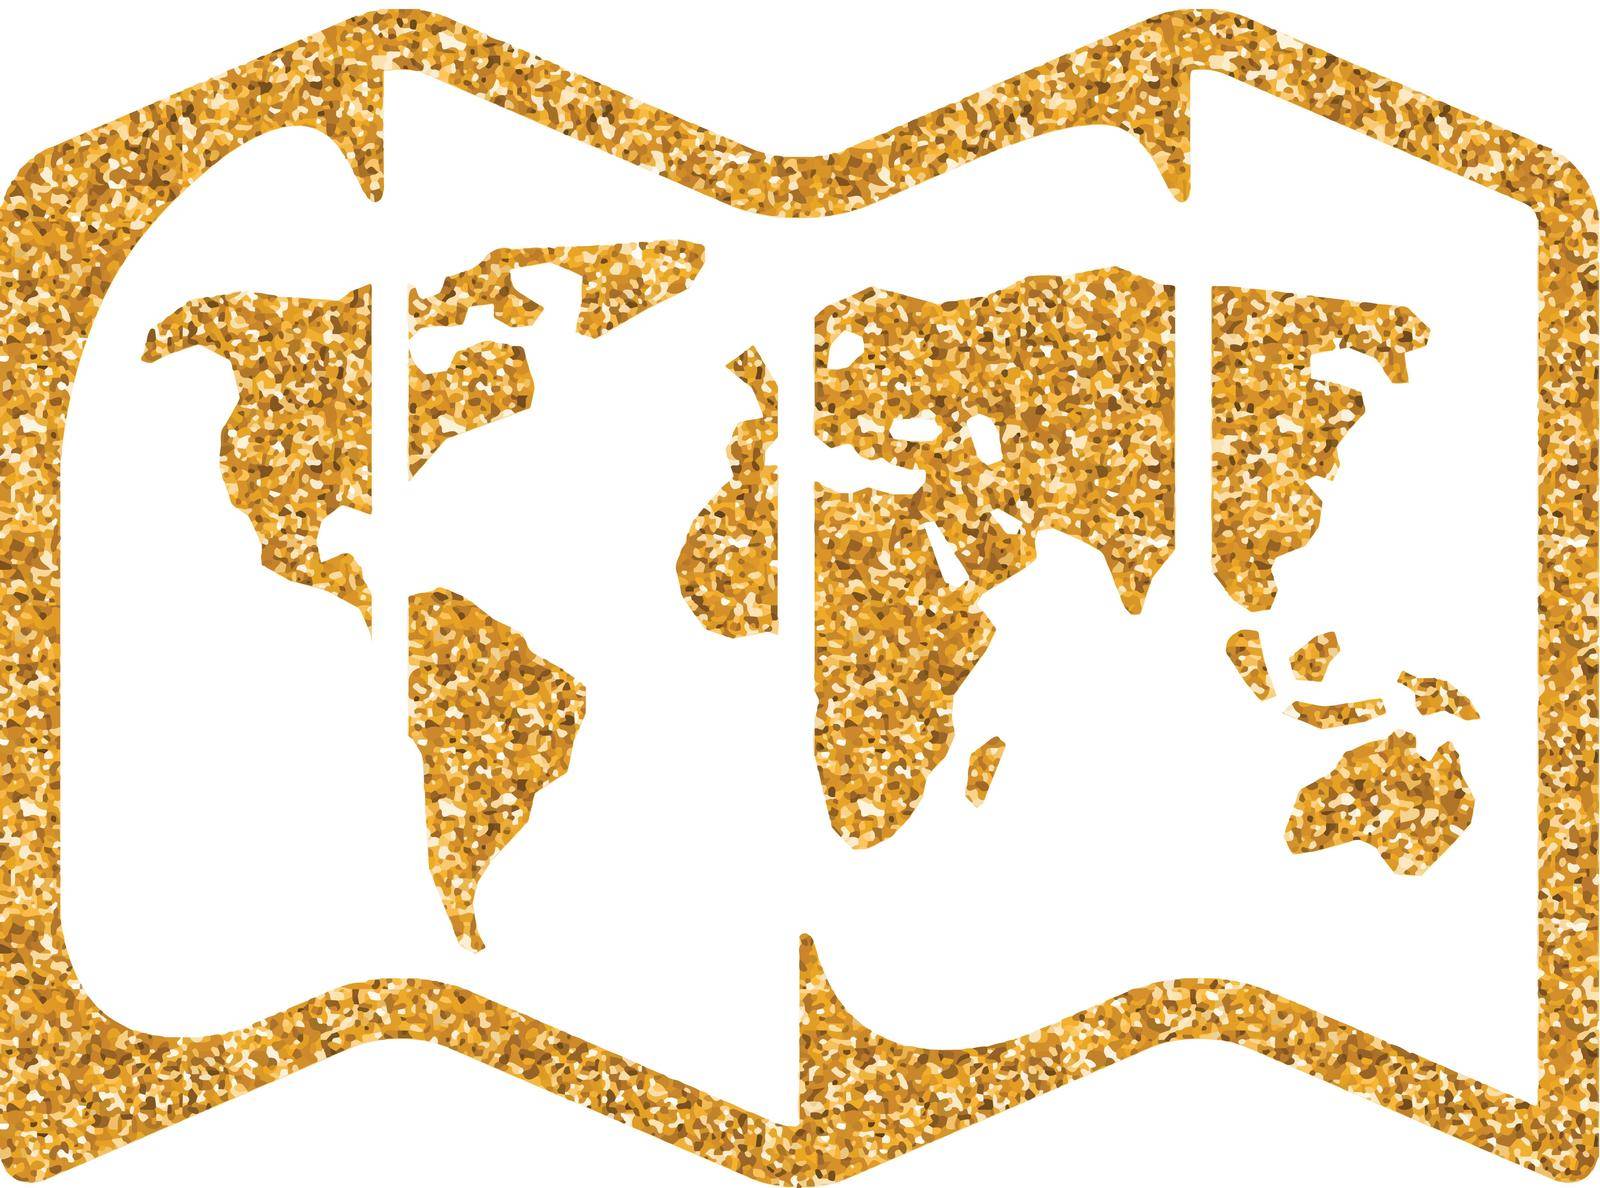 Road map icon in gold glitter texture. Sparkle luxury style vector illustration.